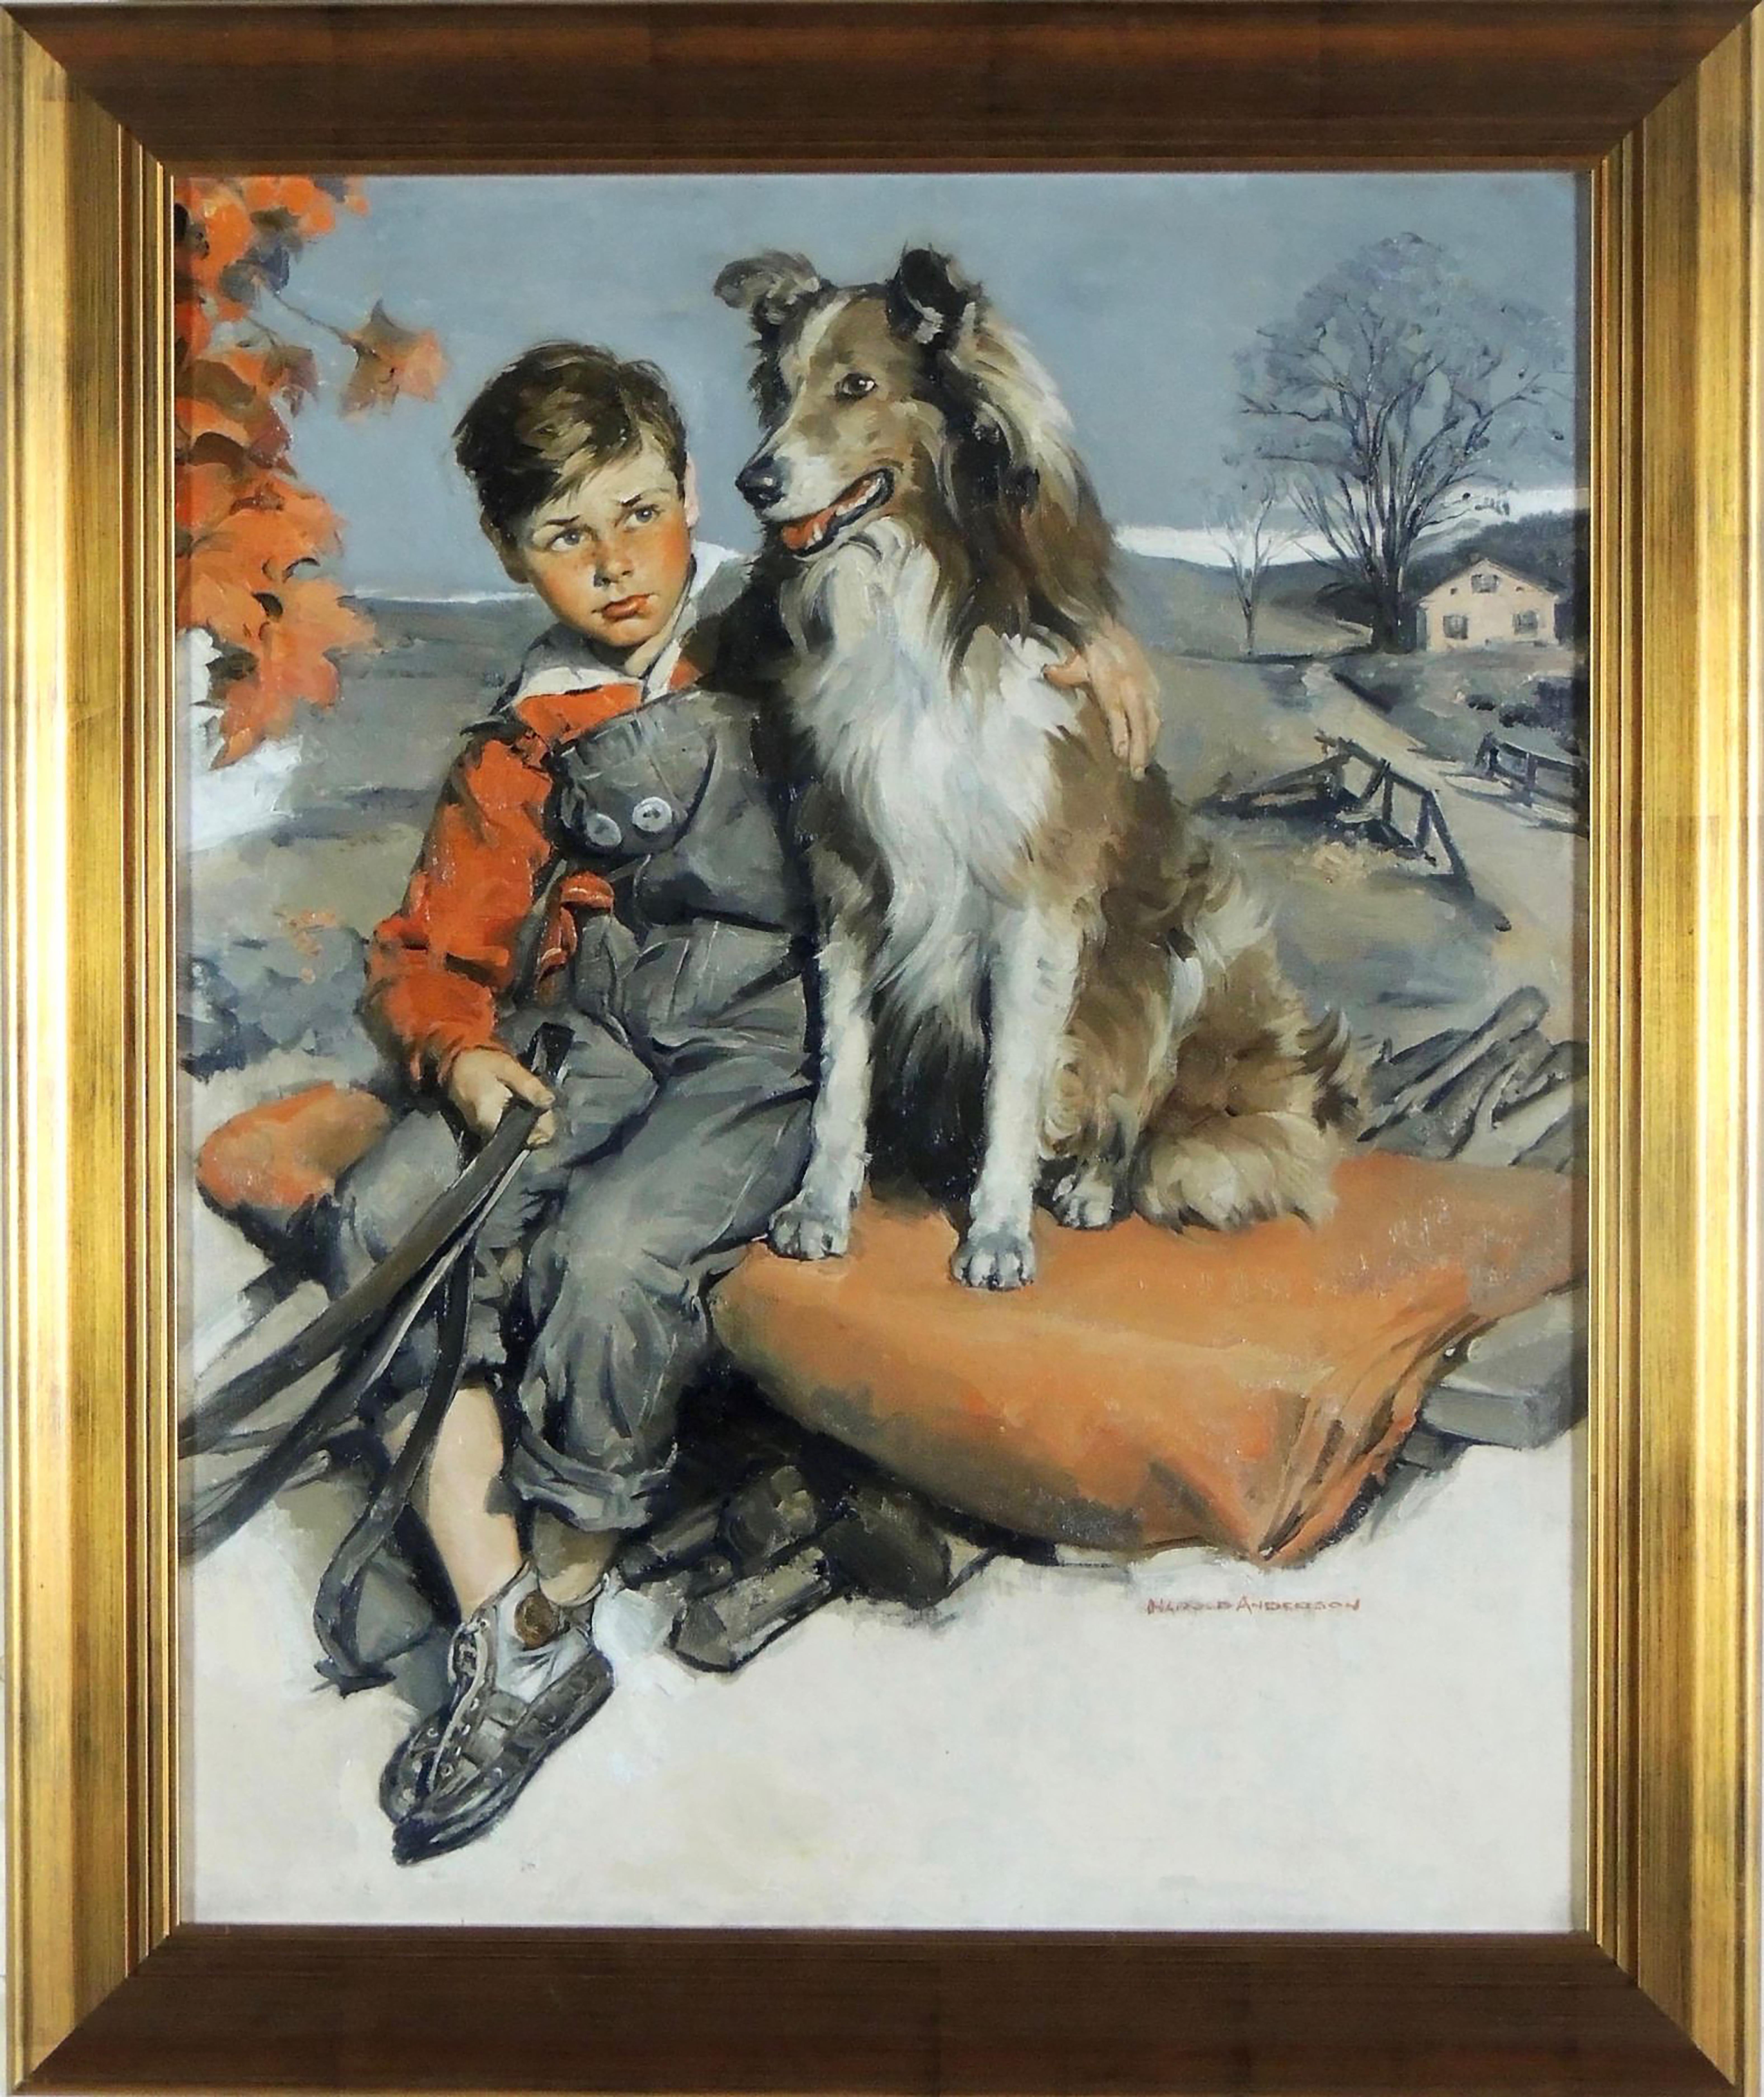 Boy with Dog - Painting by Harold Anderson